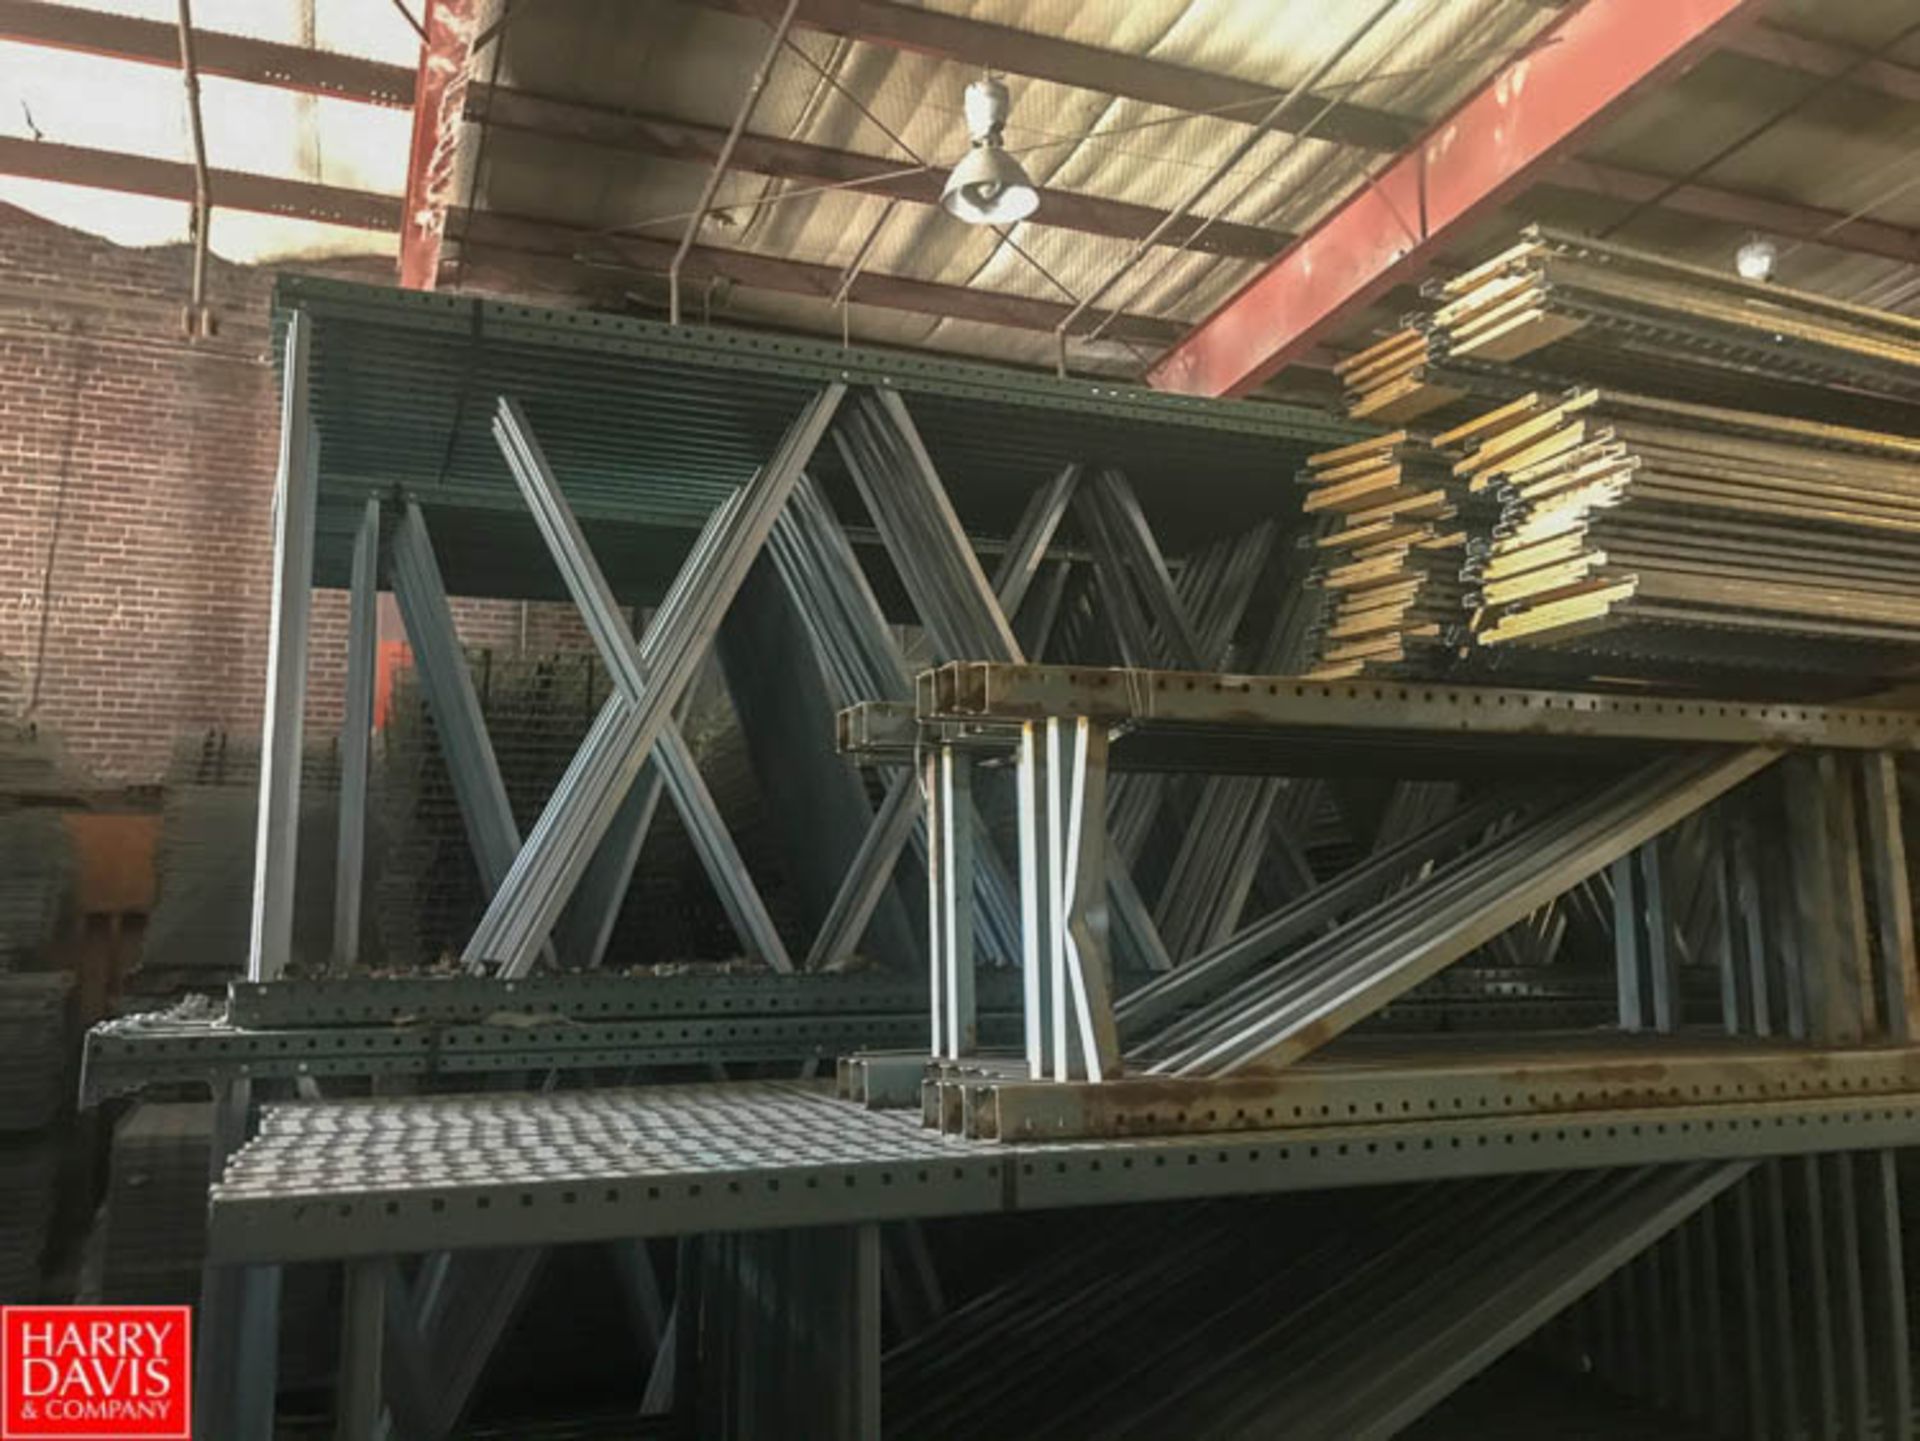 24' H x 61"" Wire Pallet Racking Up Rights Rigging Fee: $ 250